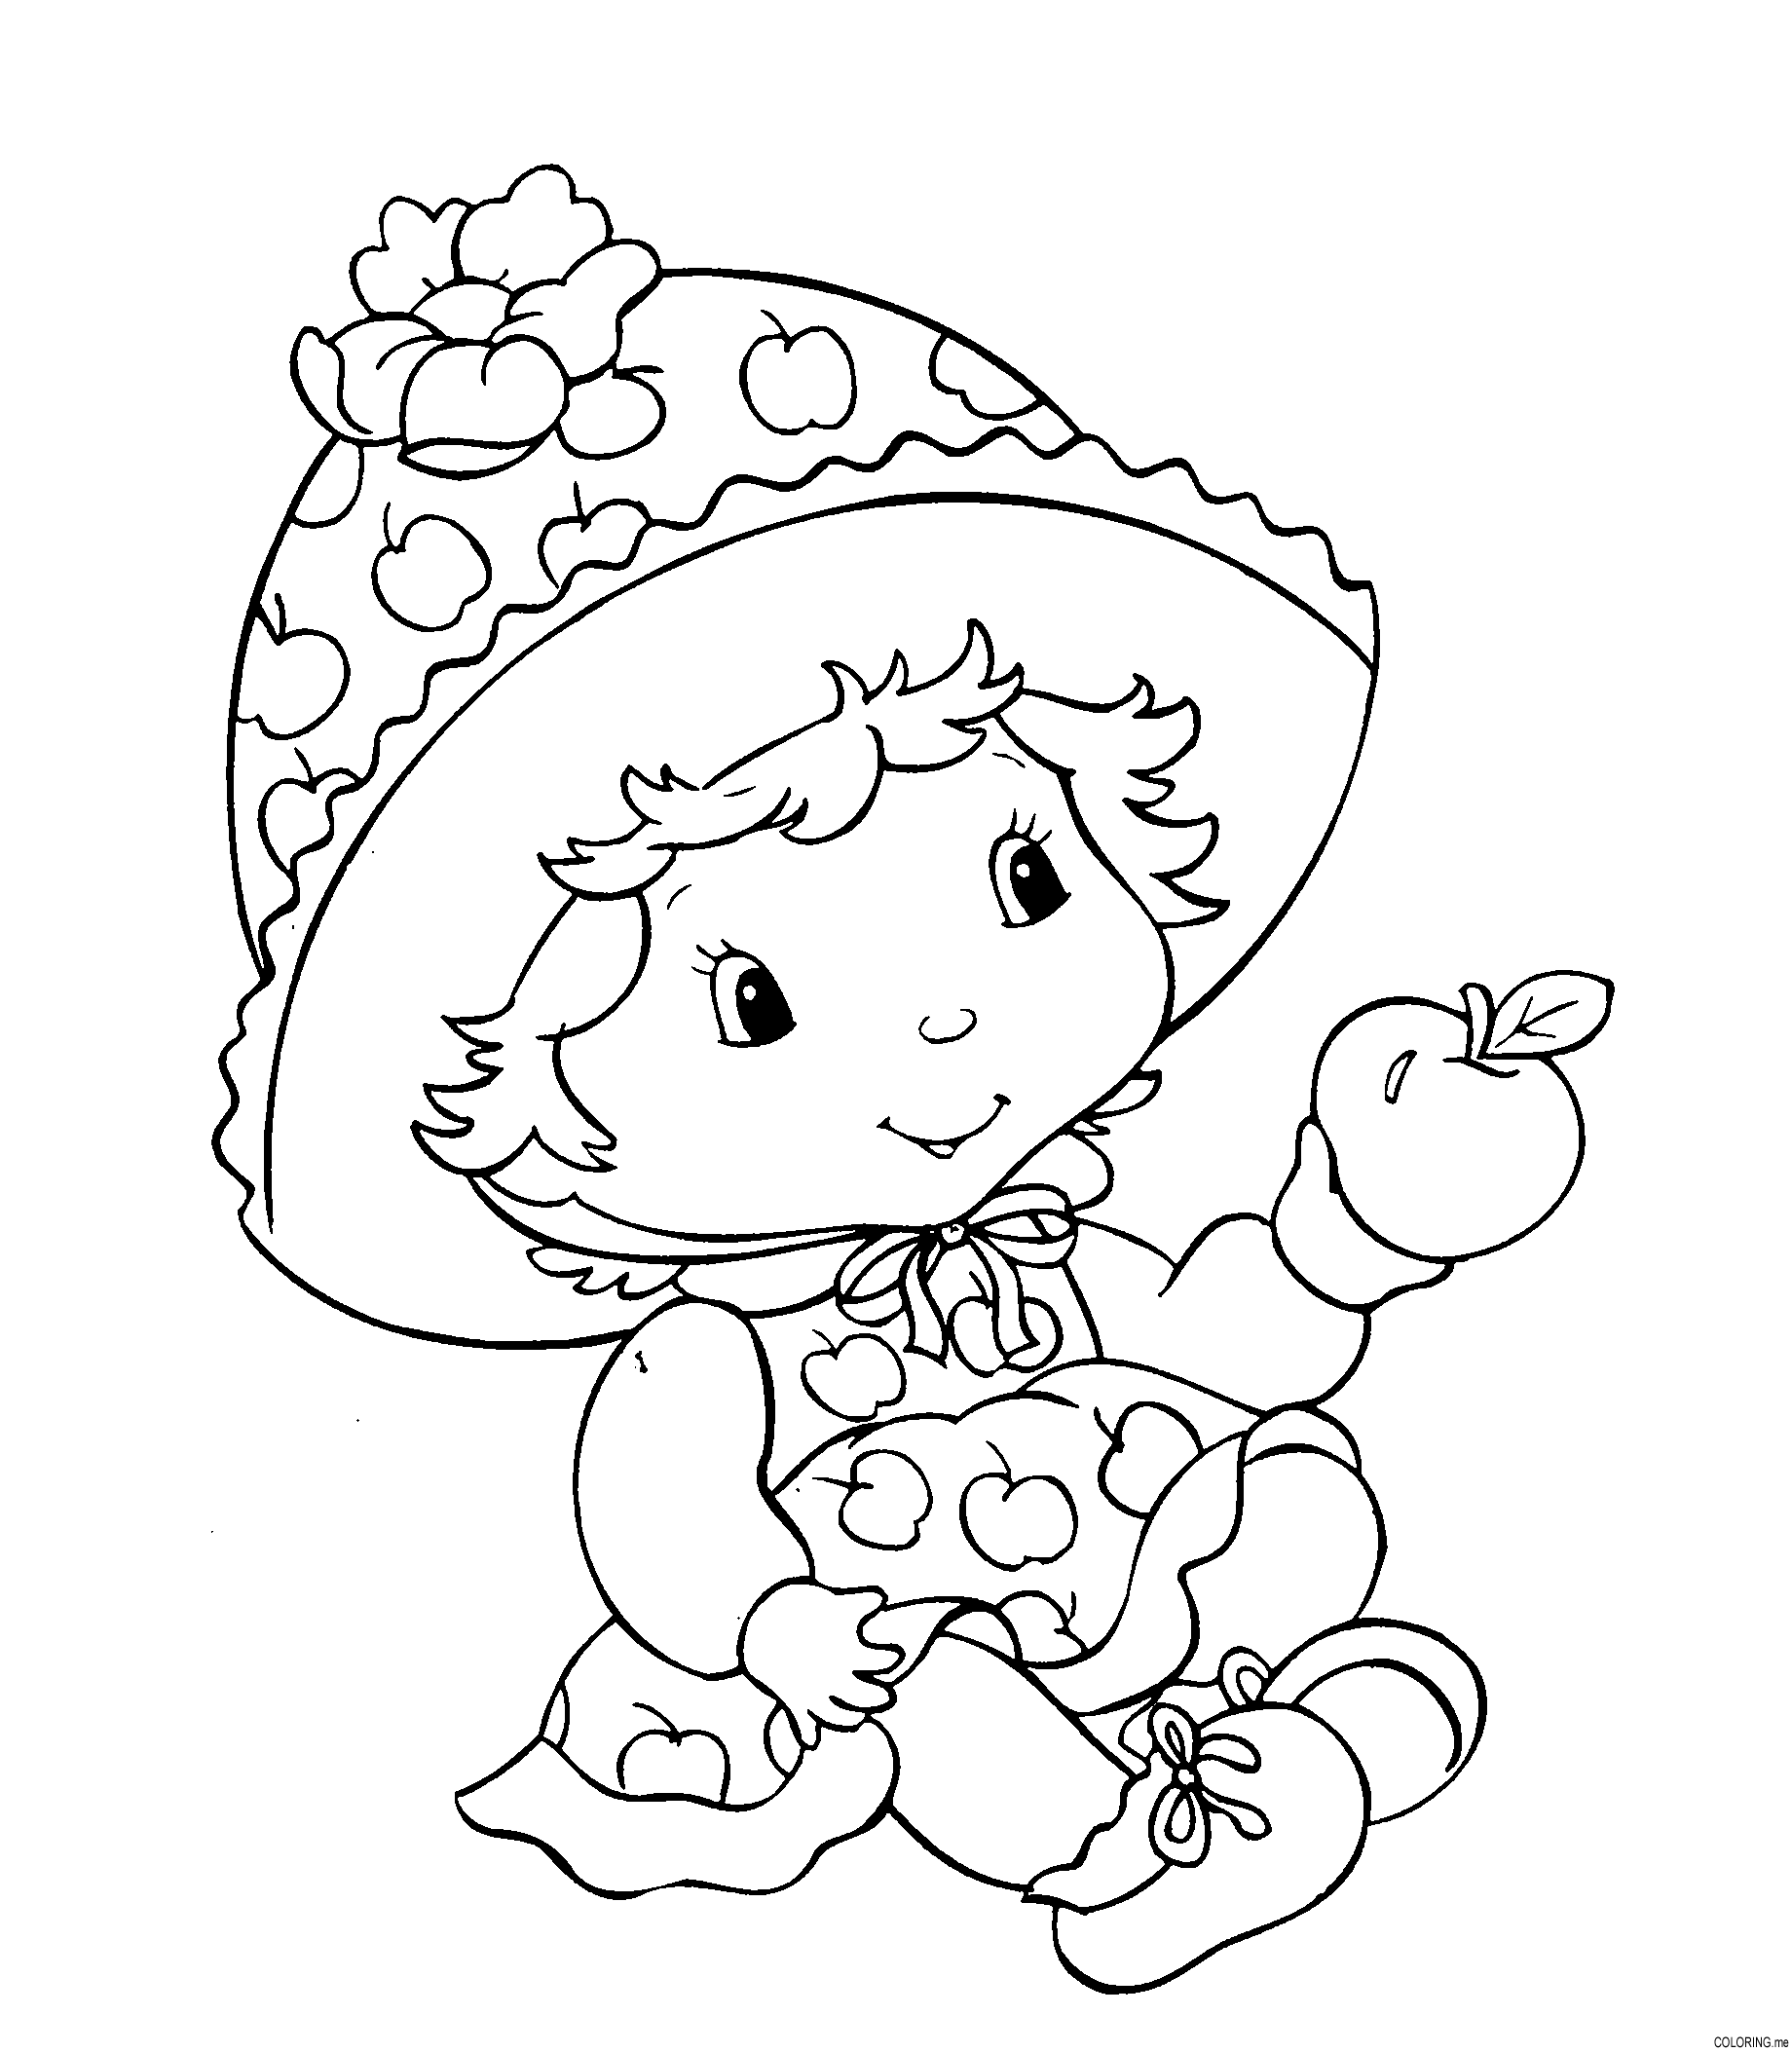 Strawberry Shortcake Coloring Pages TV Film Printable 2020 08100 Coloring4free